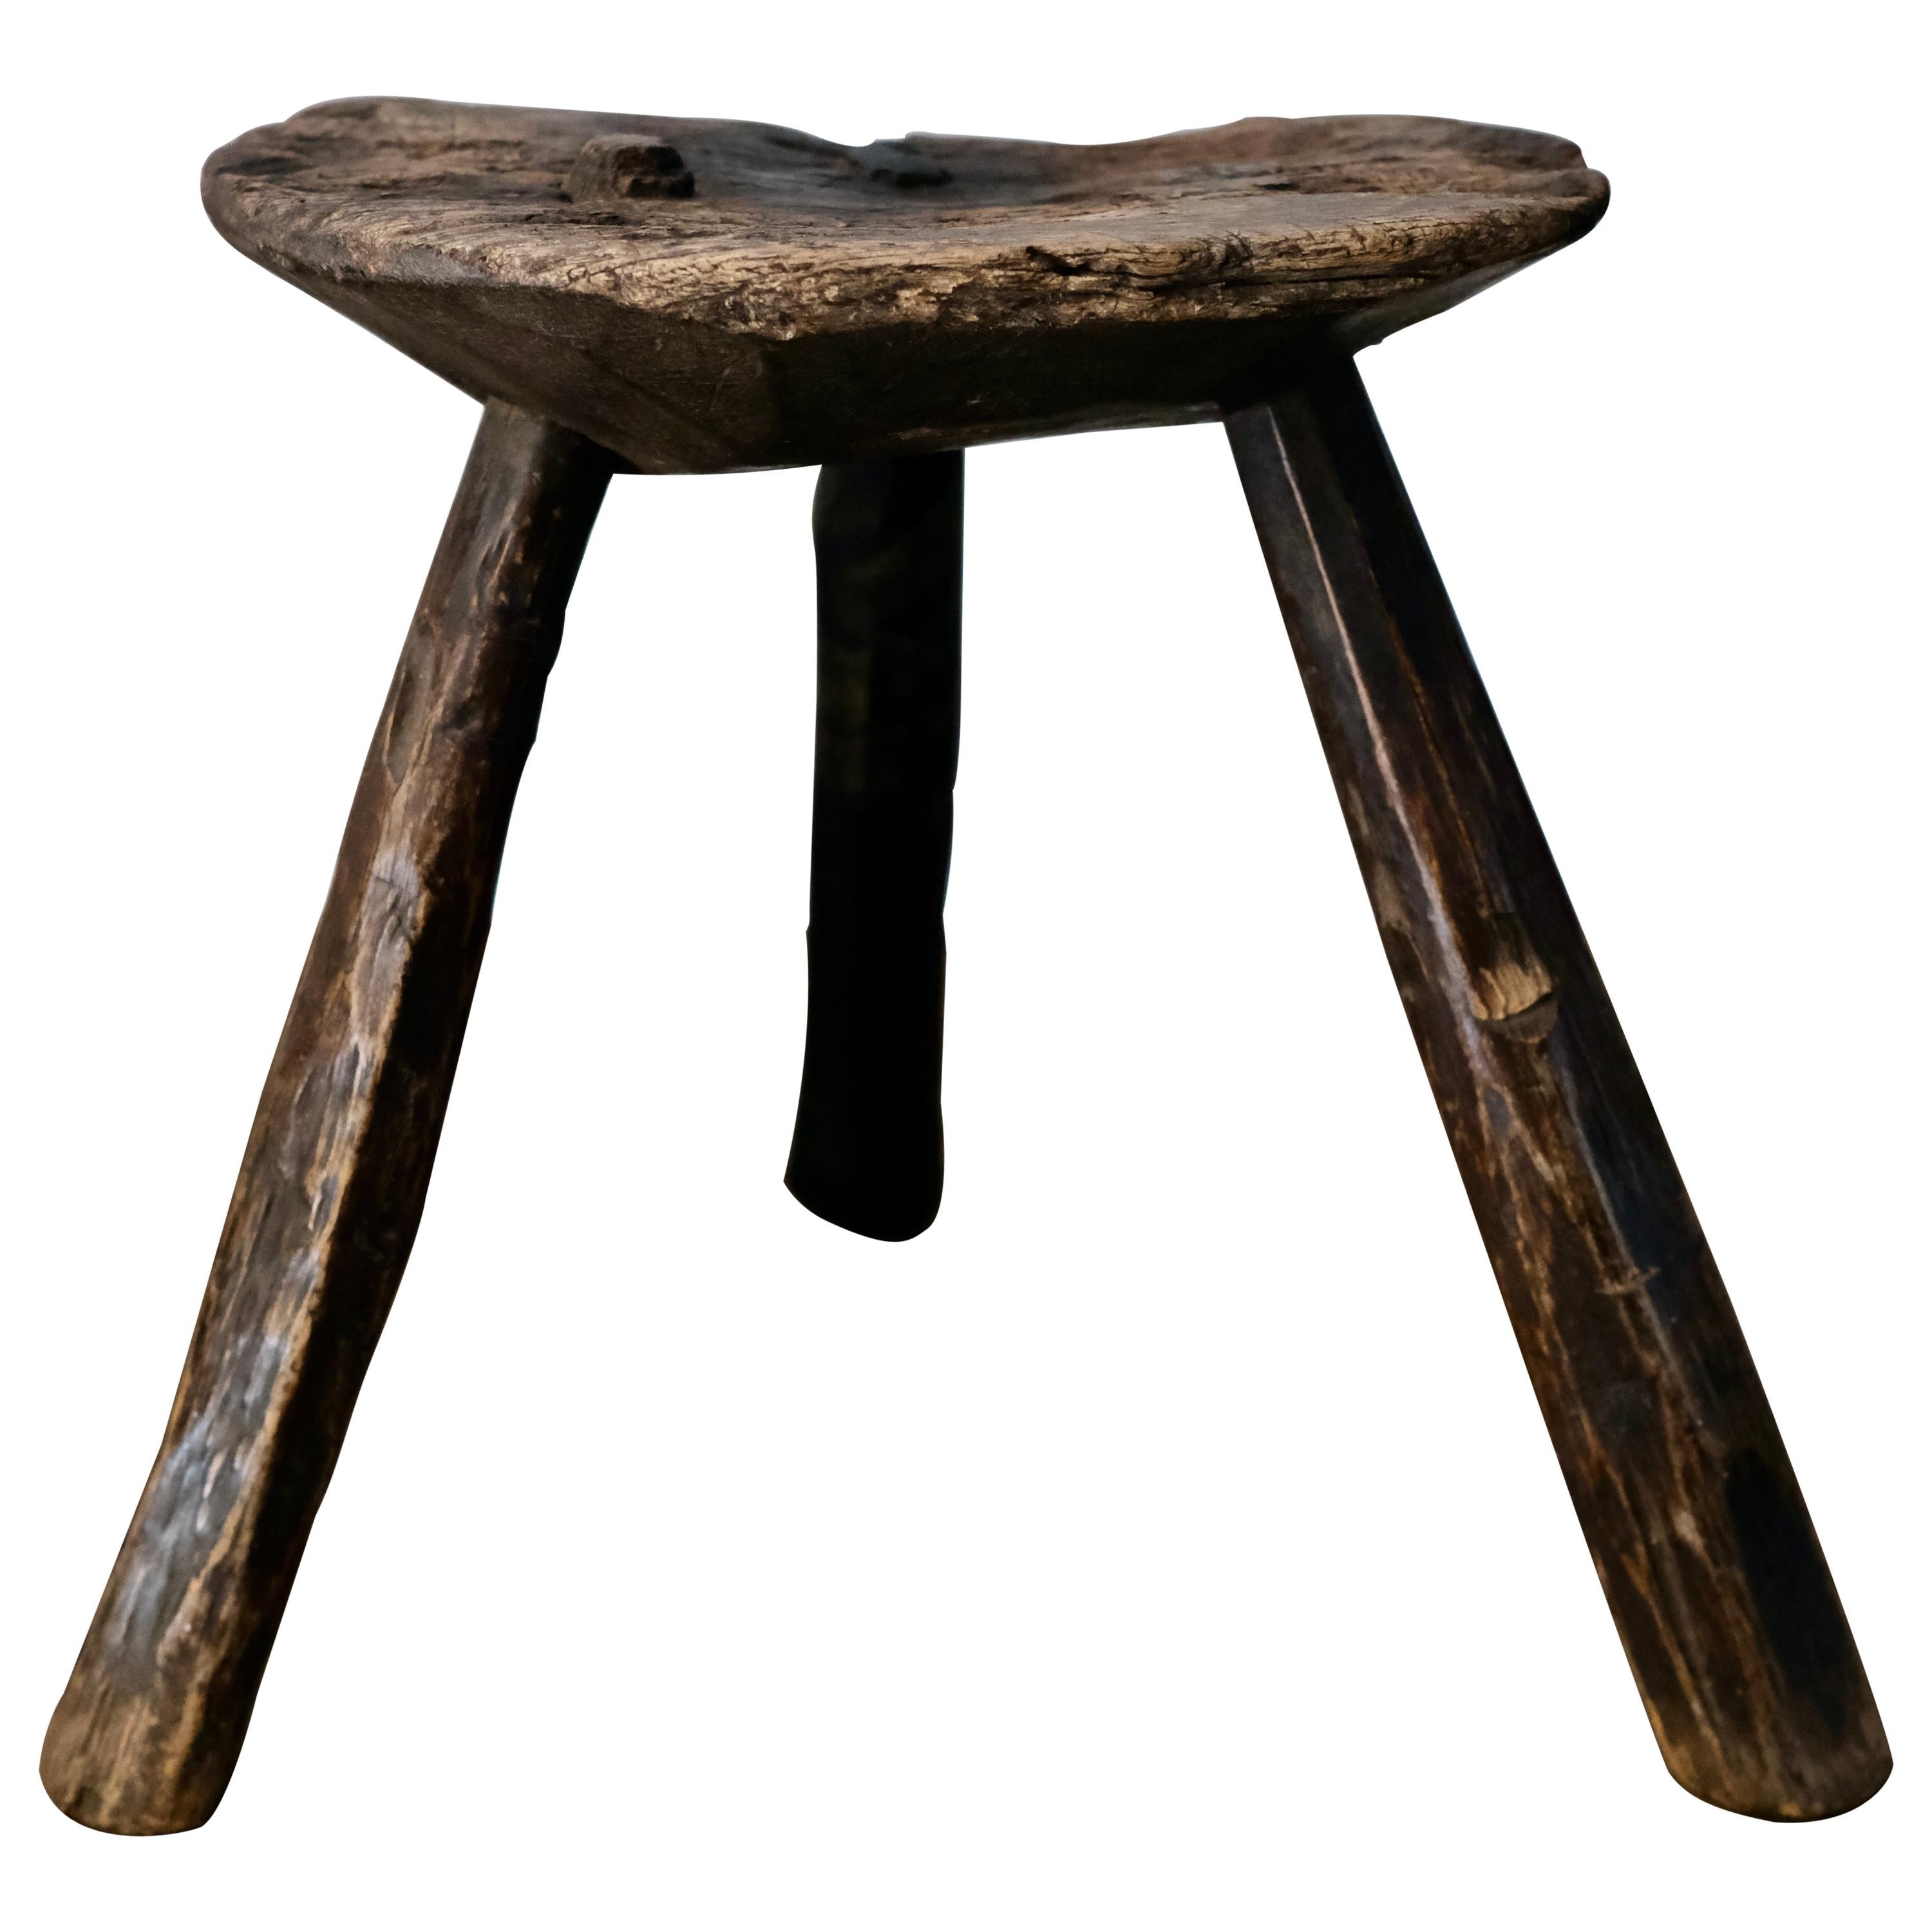 Mesquite Stool from Mexico, Circa 1920's